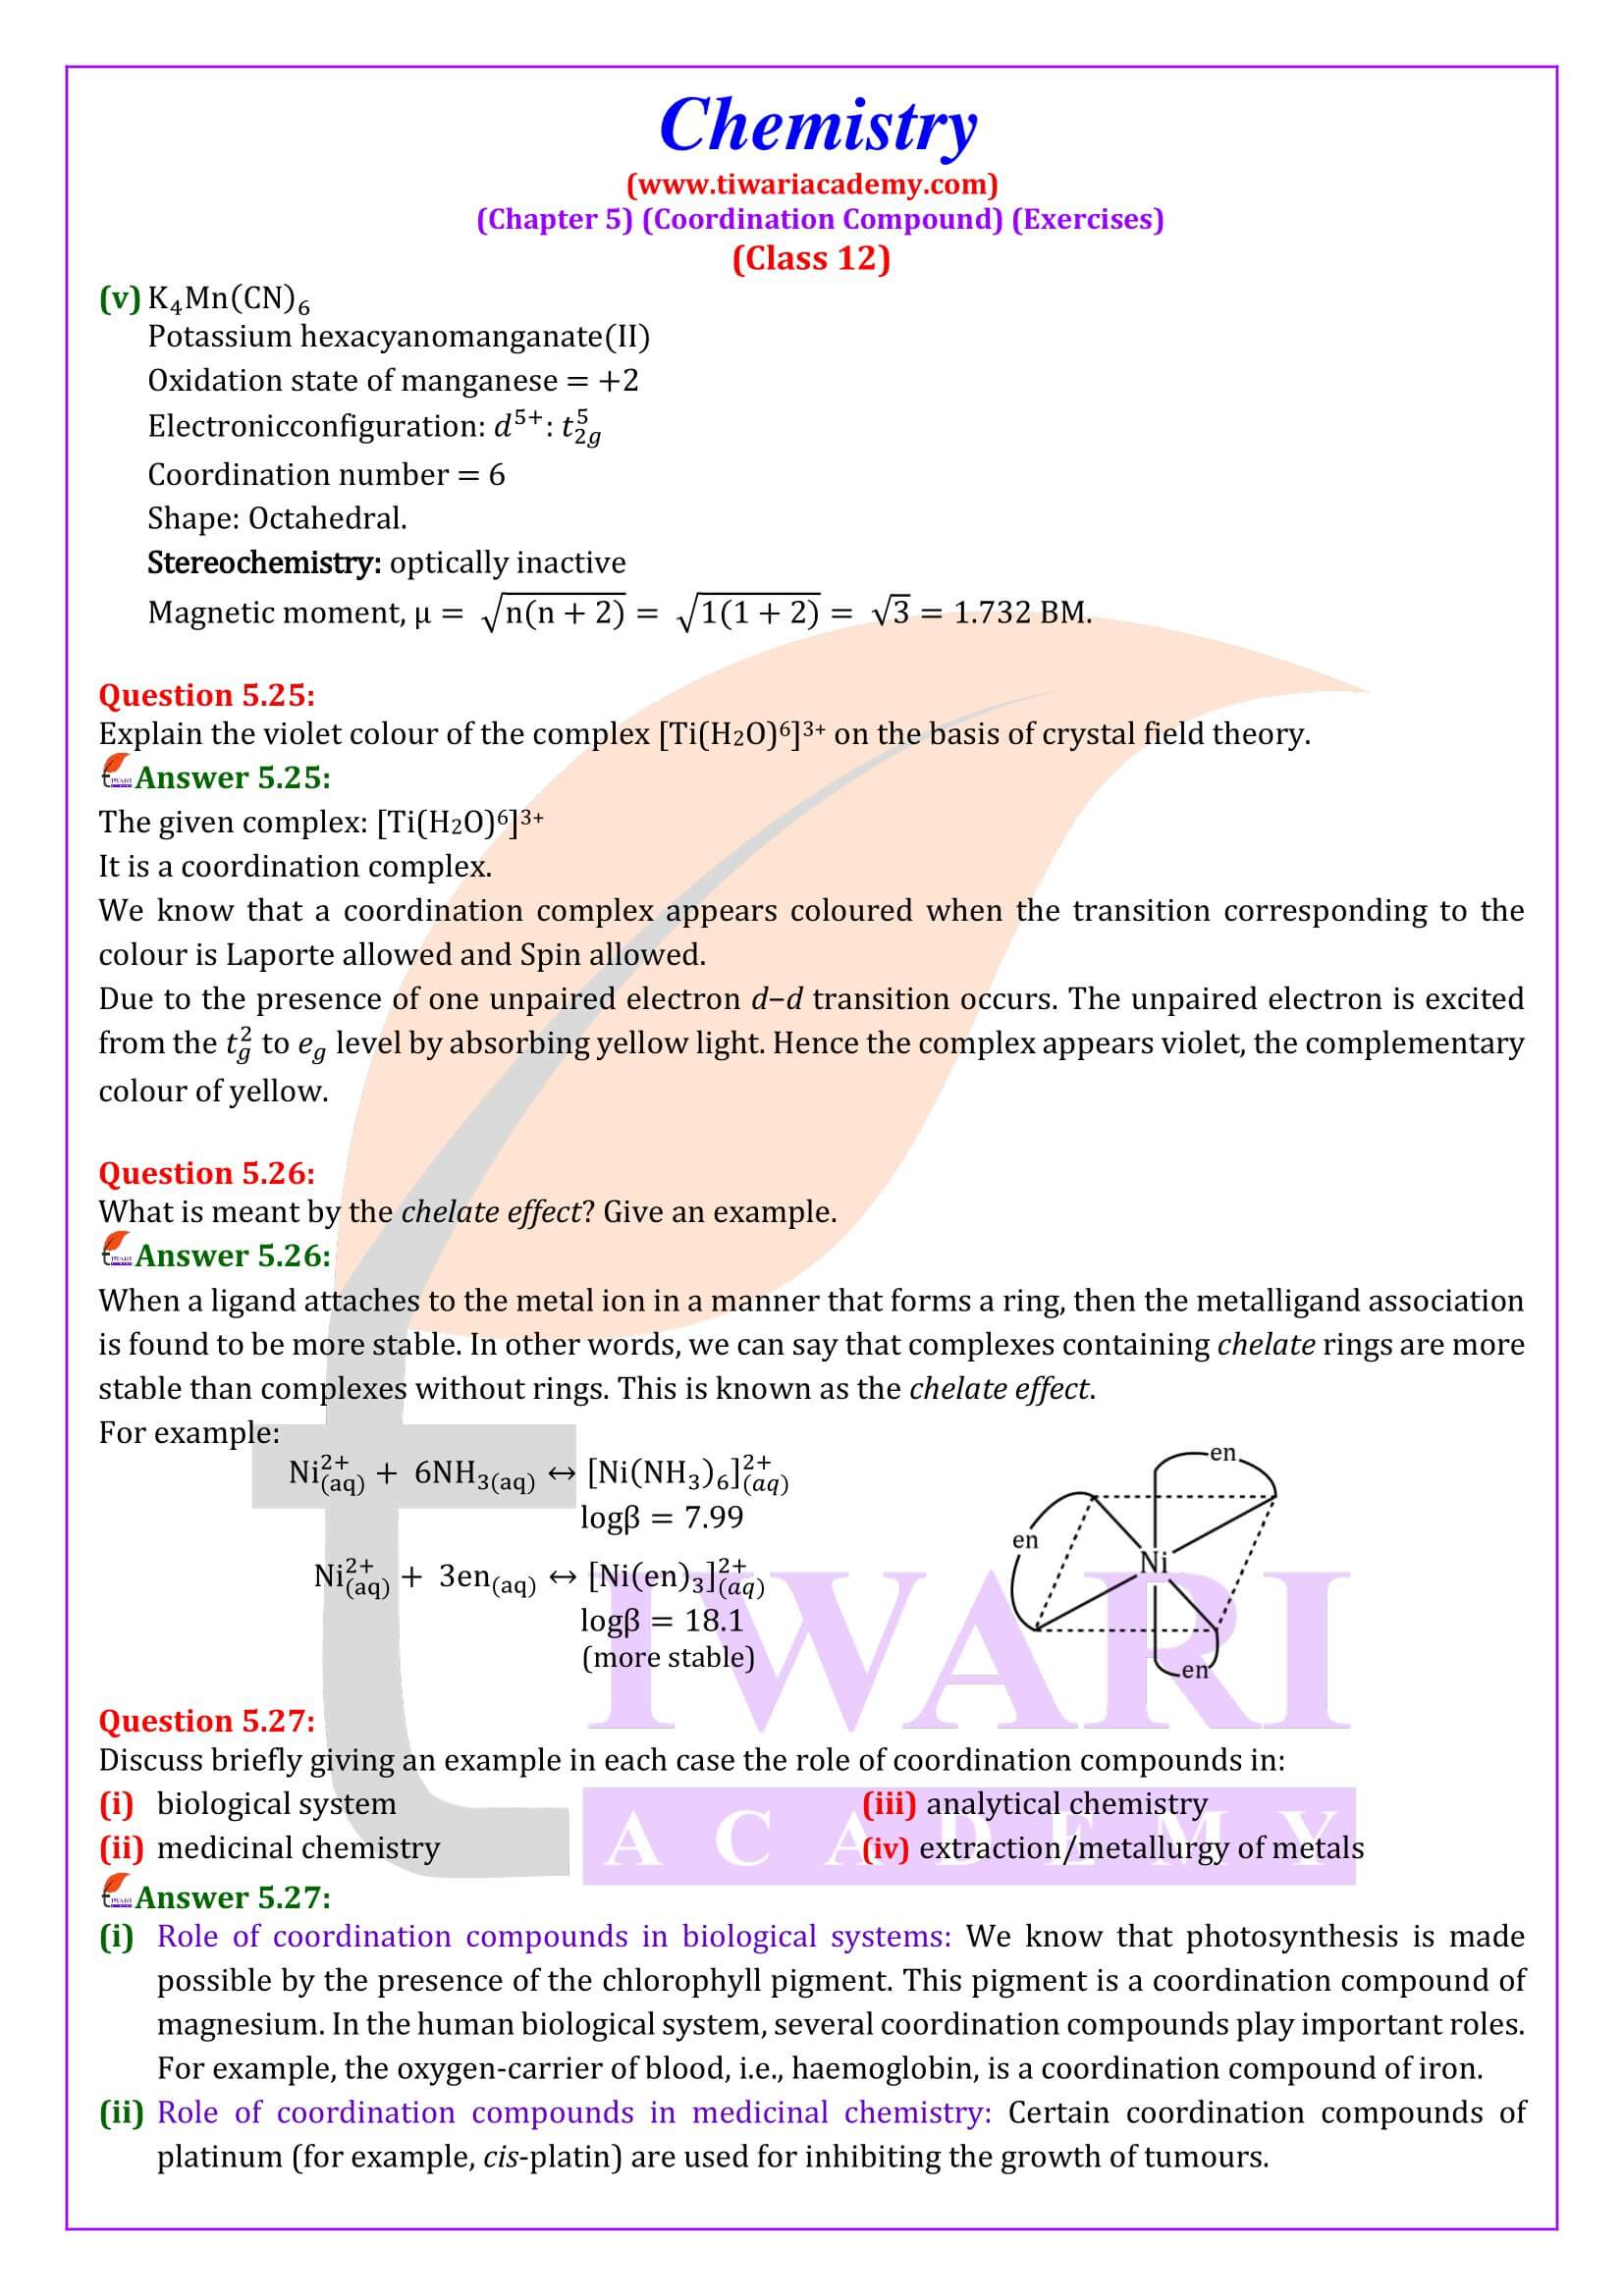 Class 12 Chemistry Chapter 5 NCERT Solutions